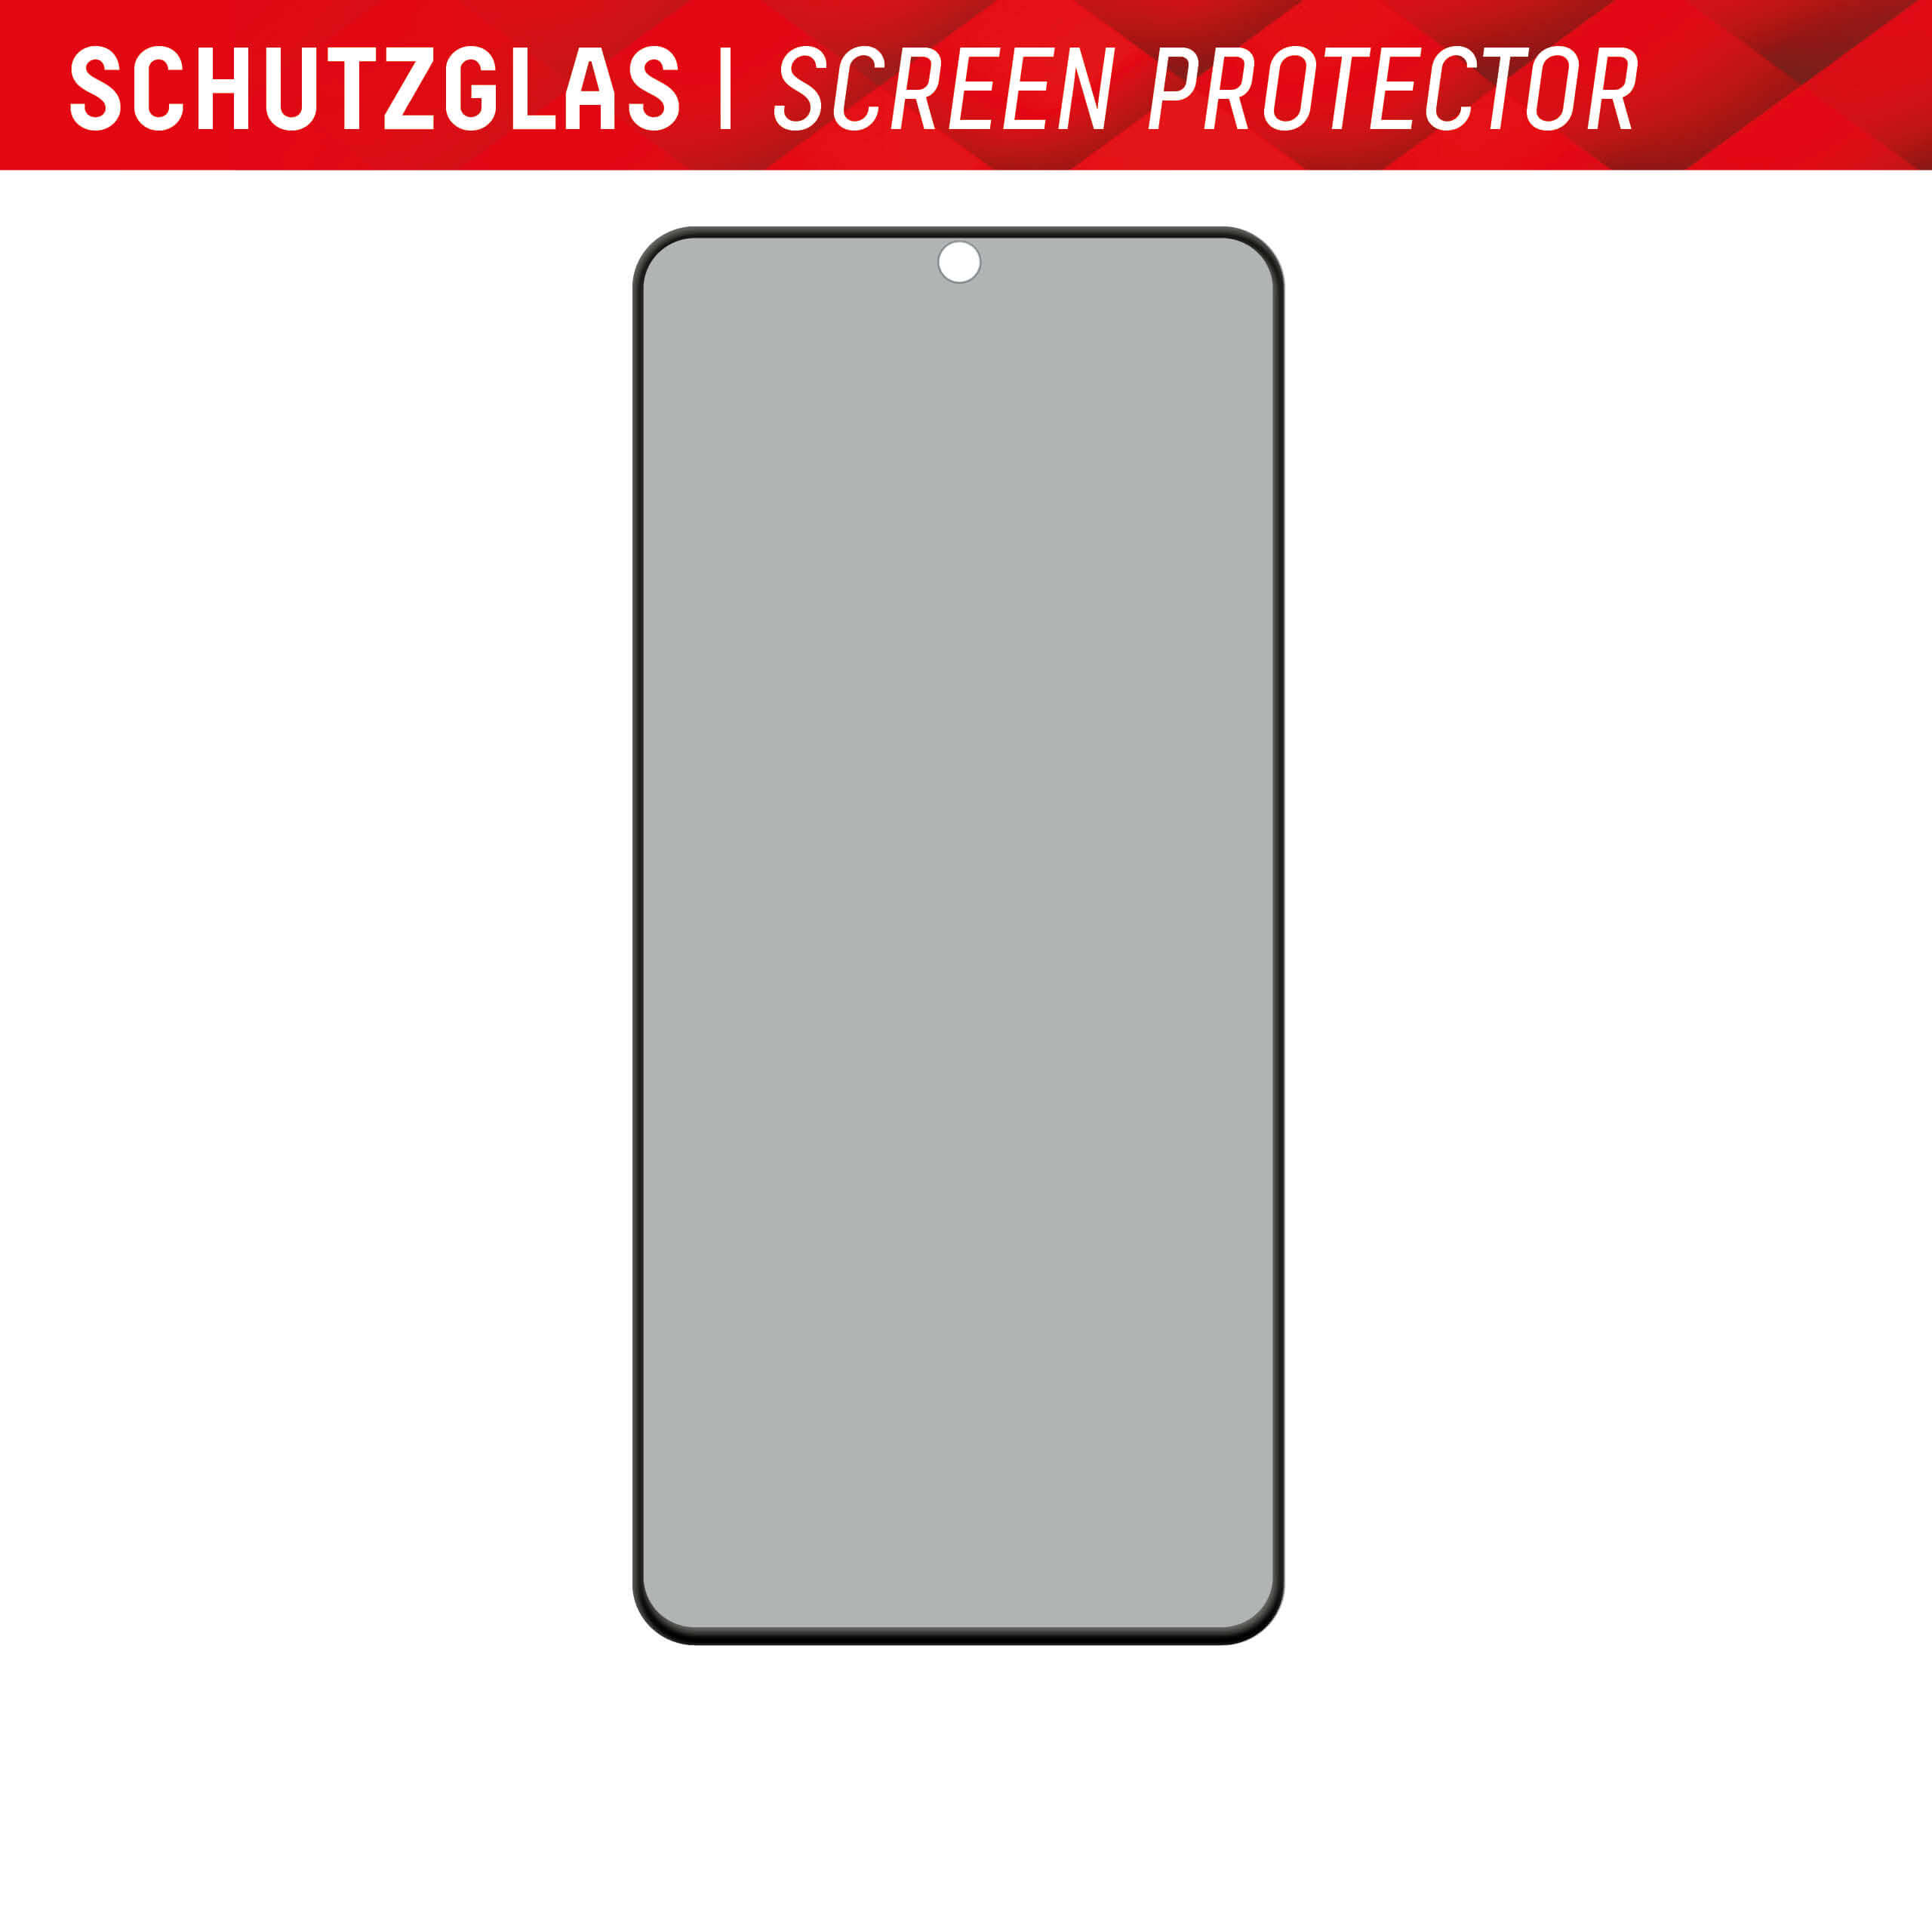 Samsung Galaxy S22/S23 Privacy Screen Protector